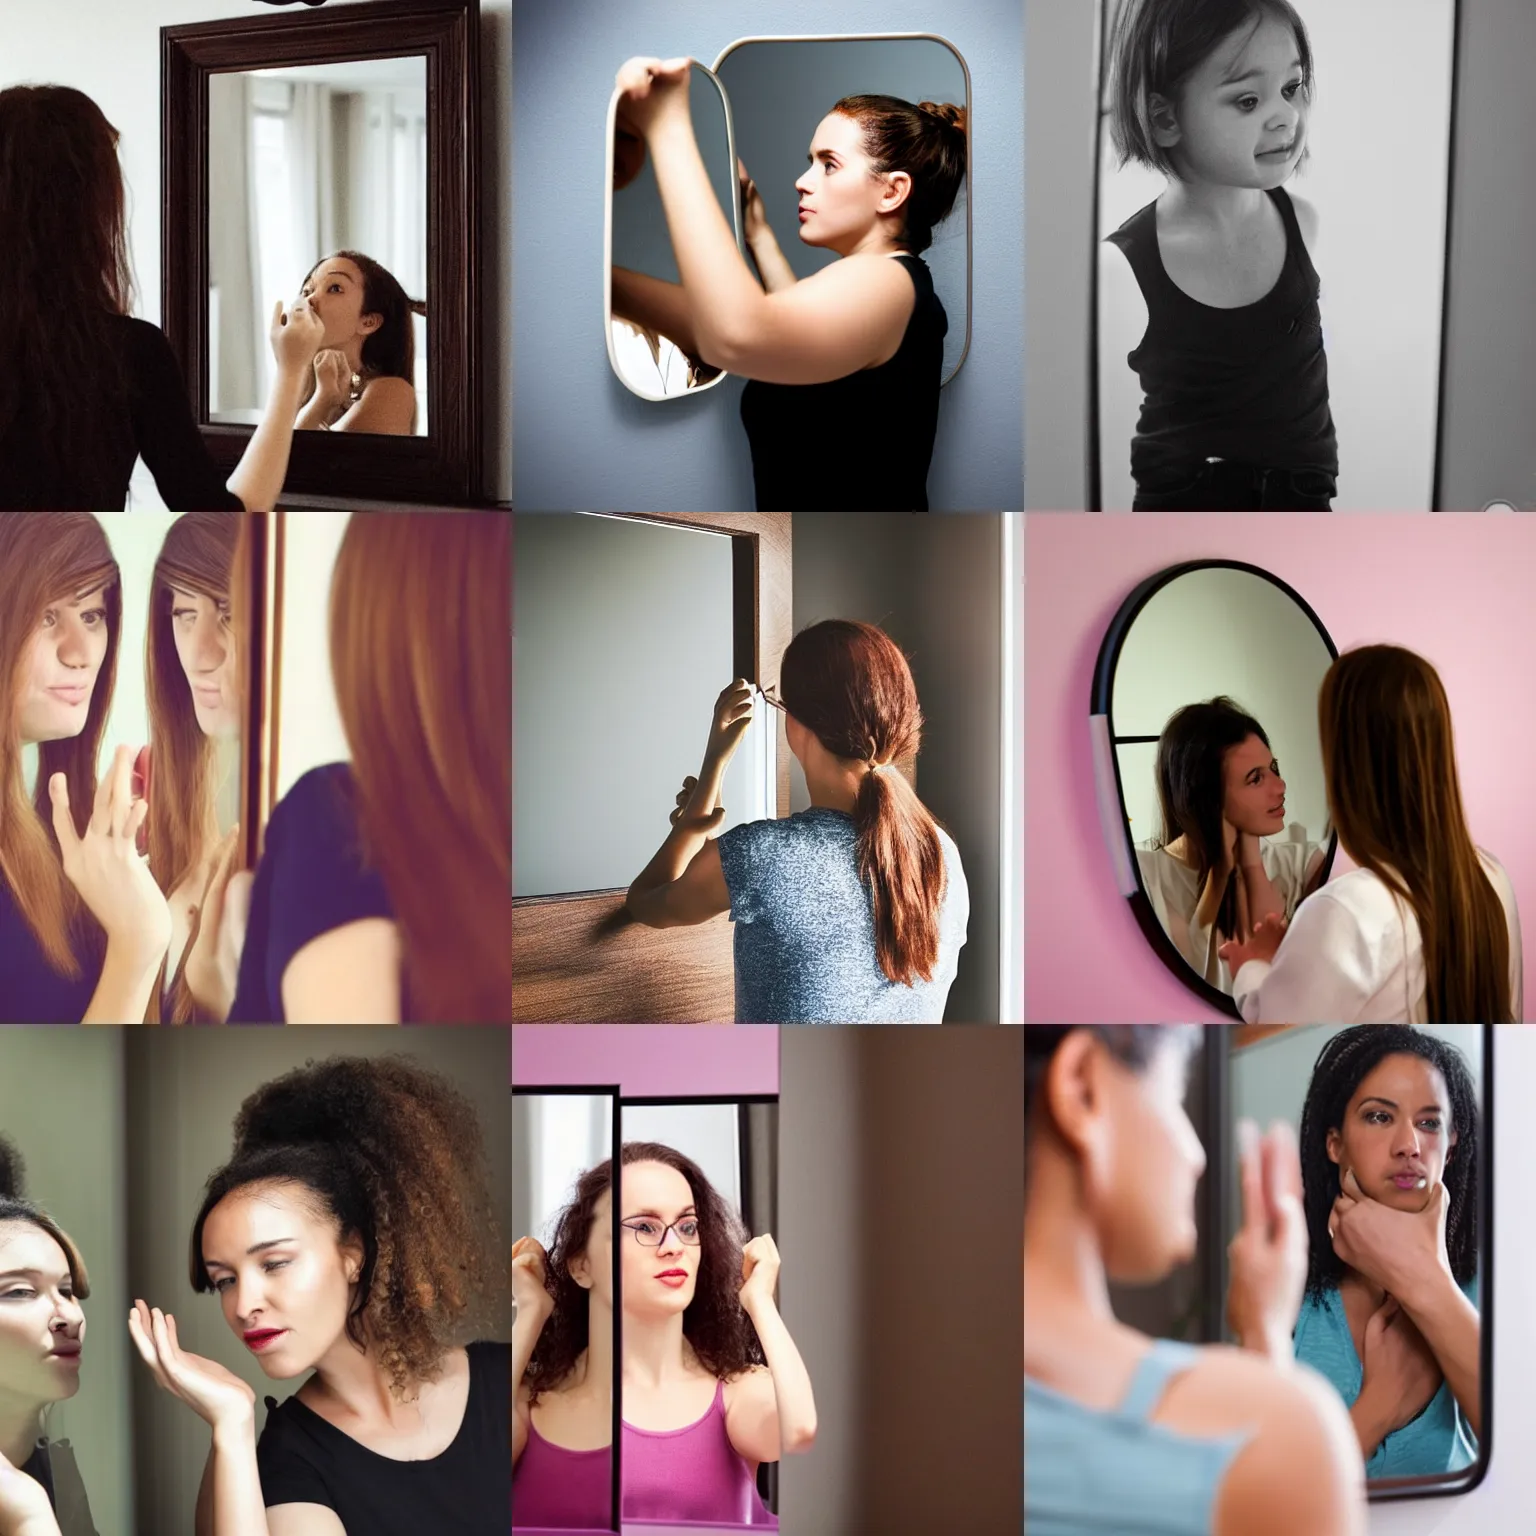 Prompt: she recognizes her reflection in the mirror, she knows it is good